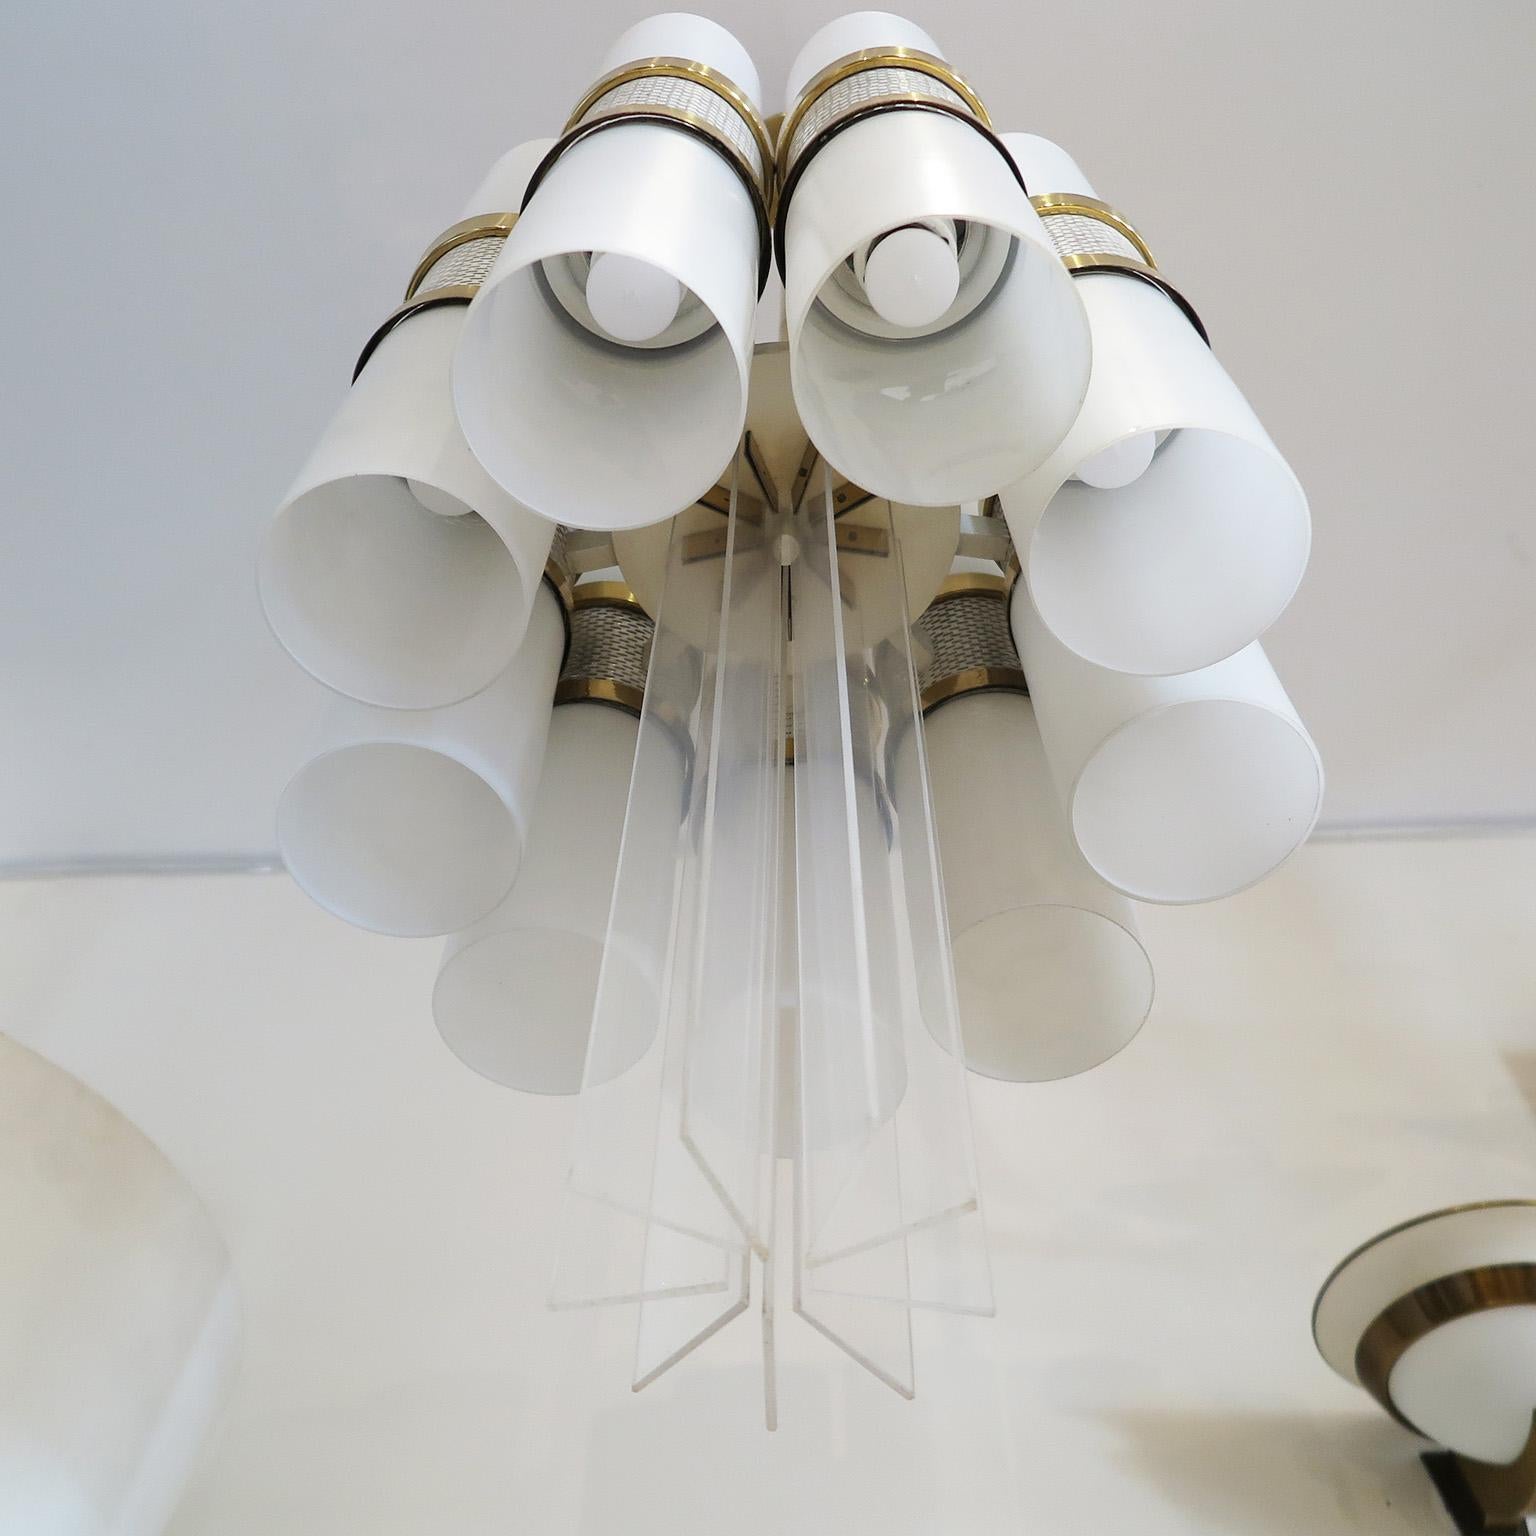 Pair of Cylindrical Chandeliers in Milk Glass and Brass, Germany c. 1960's For Sale 4